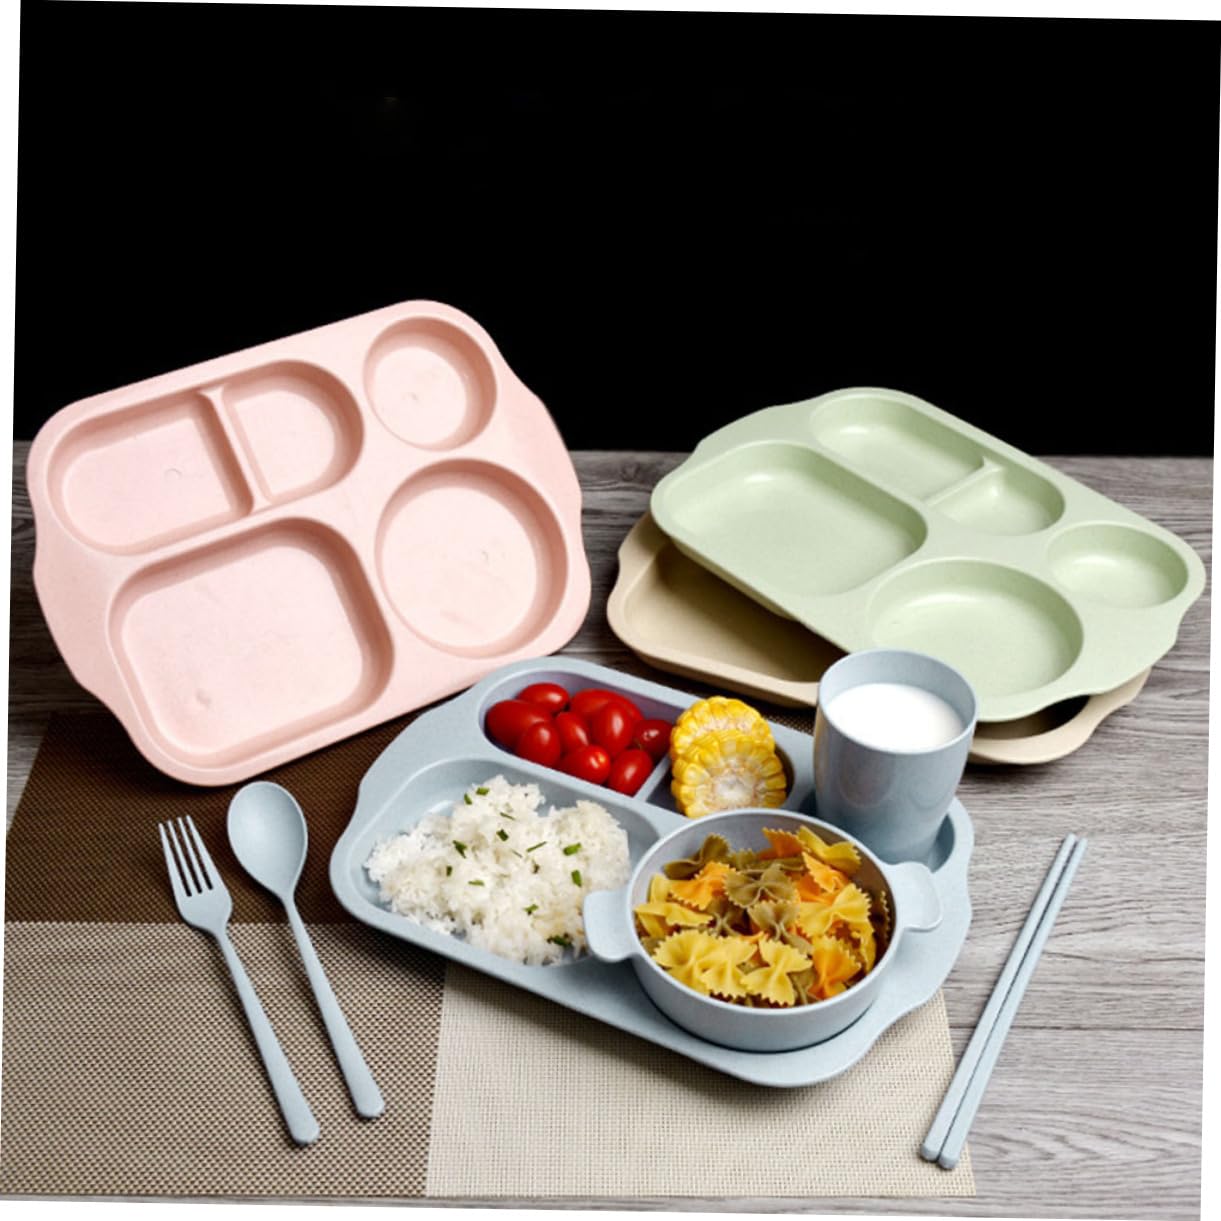 RORPOIR Divided Toddler Kids Trays for Eating Kids Plate Baby Kit Kids Suit Baby Suits Infant Suit Fiber Dinnerware Straw Wheat Travel